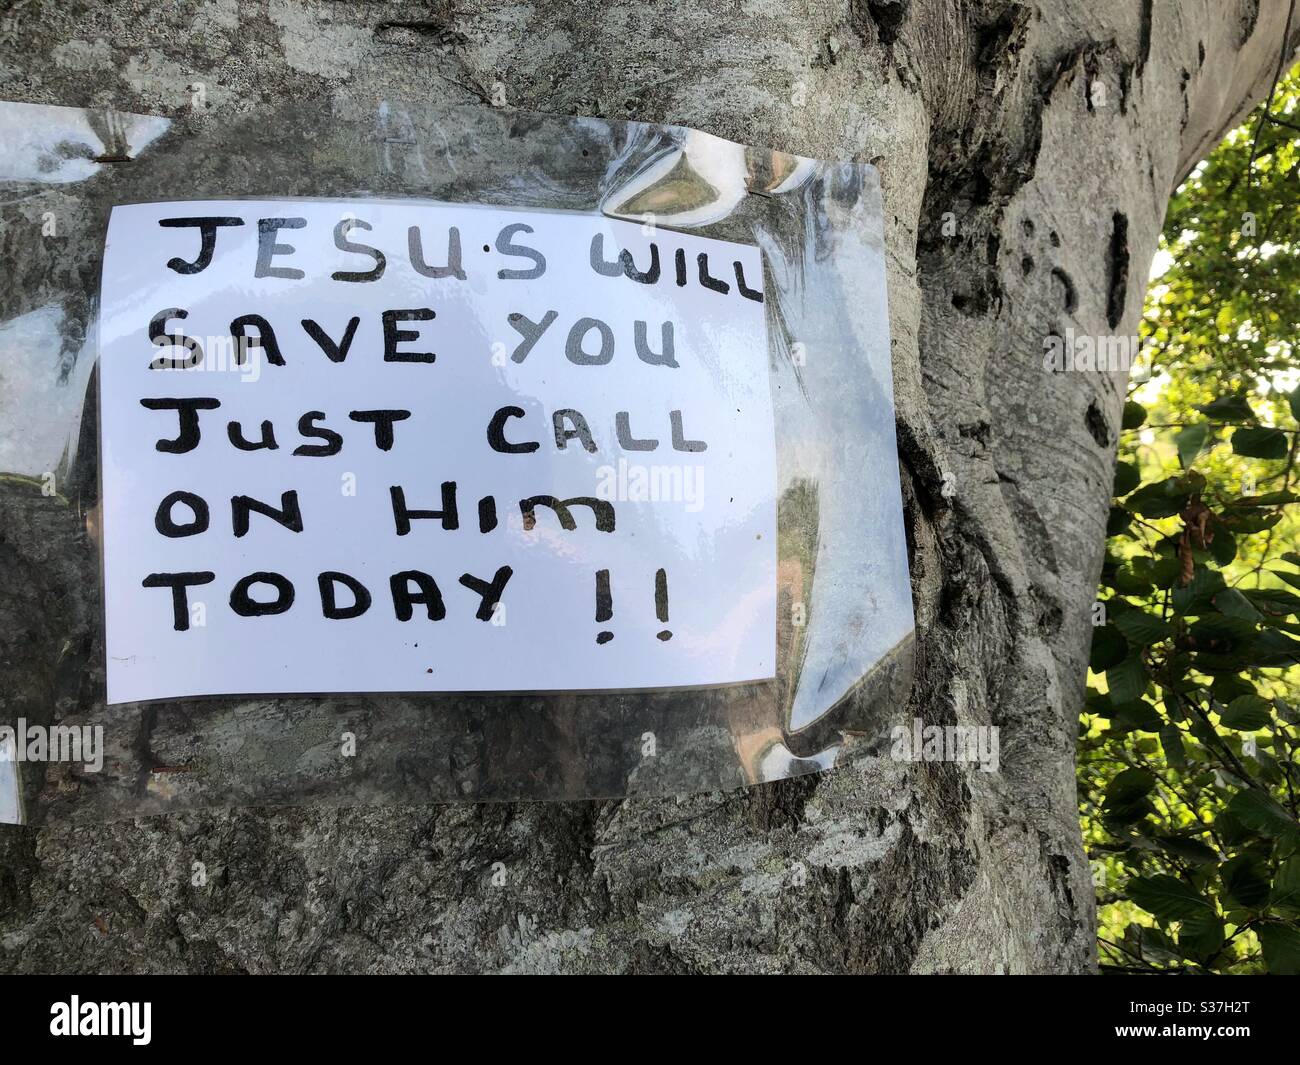 Evangelical Christian message left on tree near Cullybackey in Northern Ireland. Stock Photo